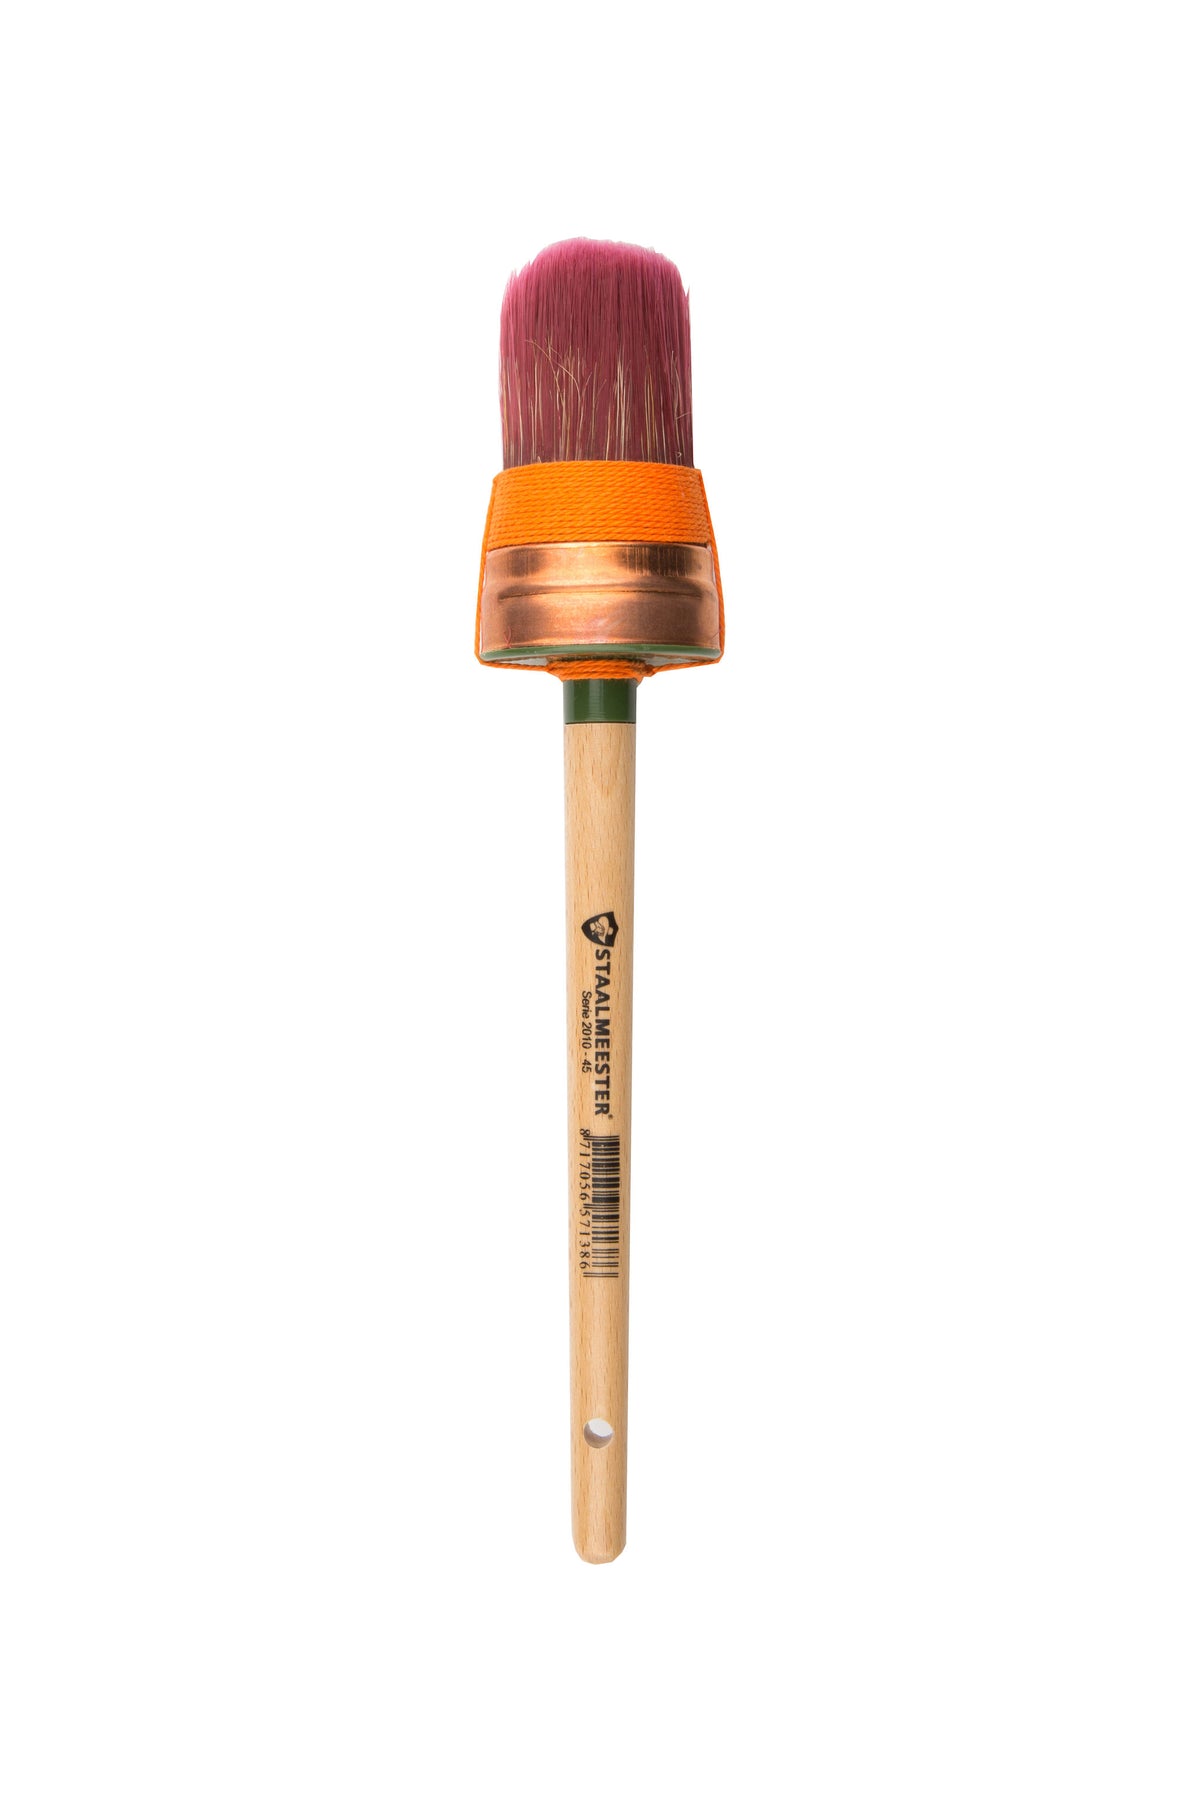 Staalmeester Brushes-Oval